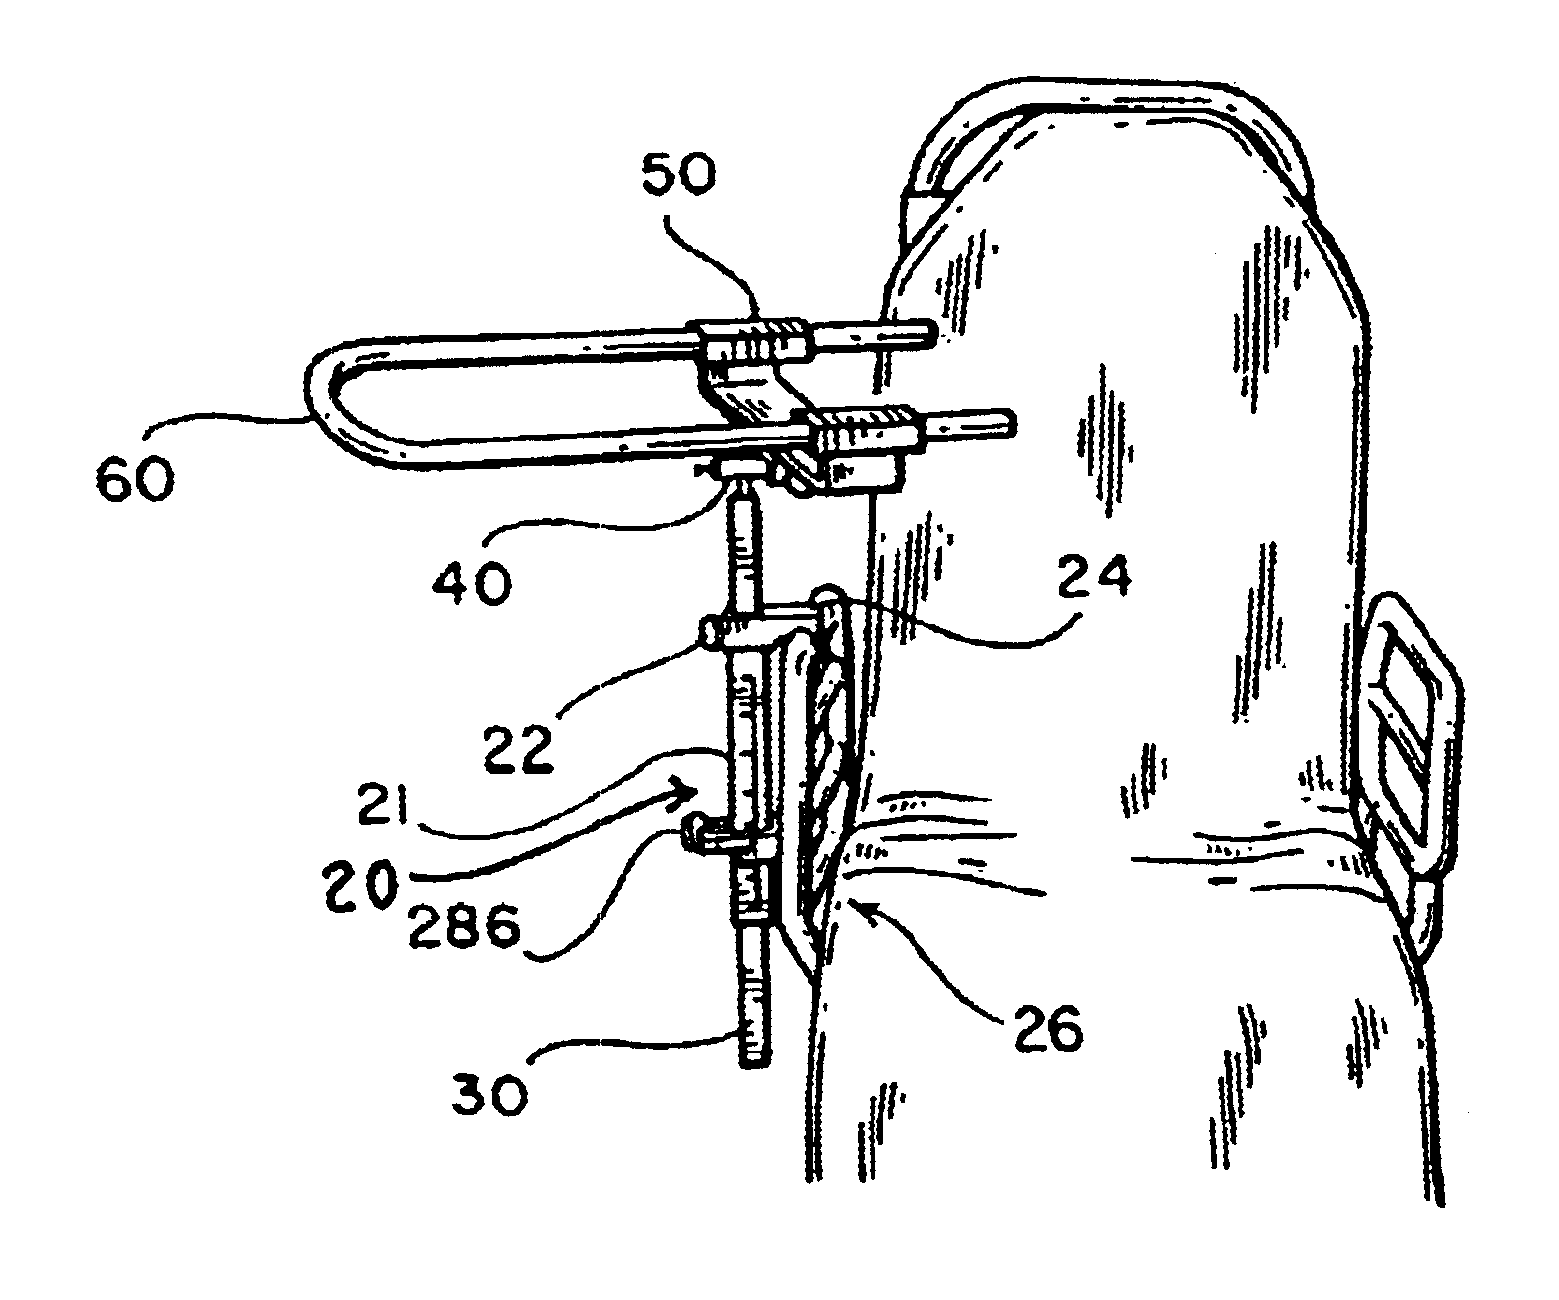 Device for upper extremity elevation